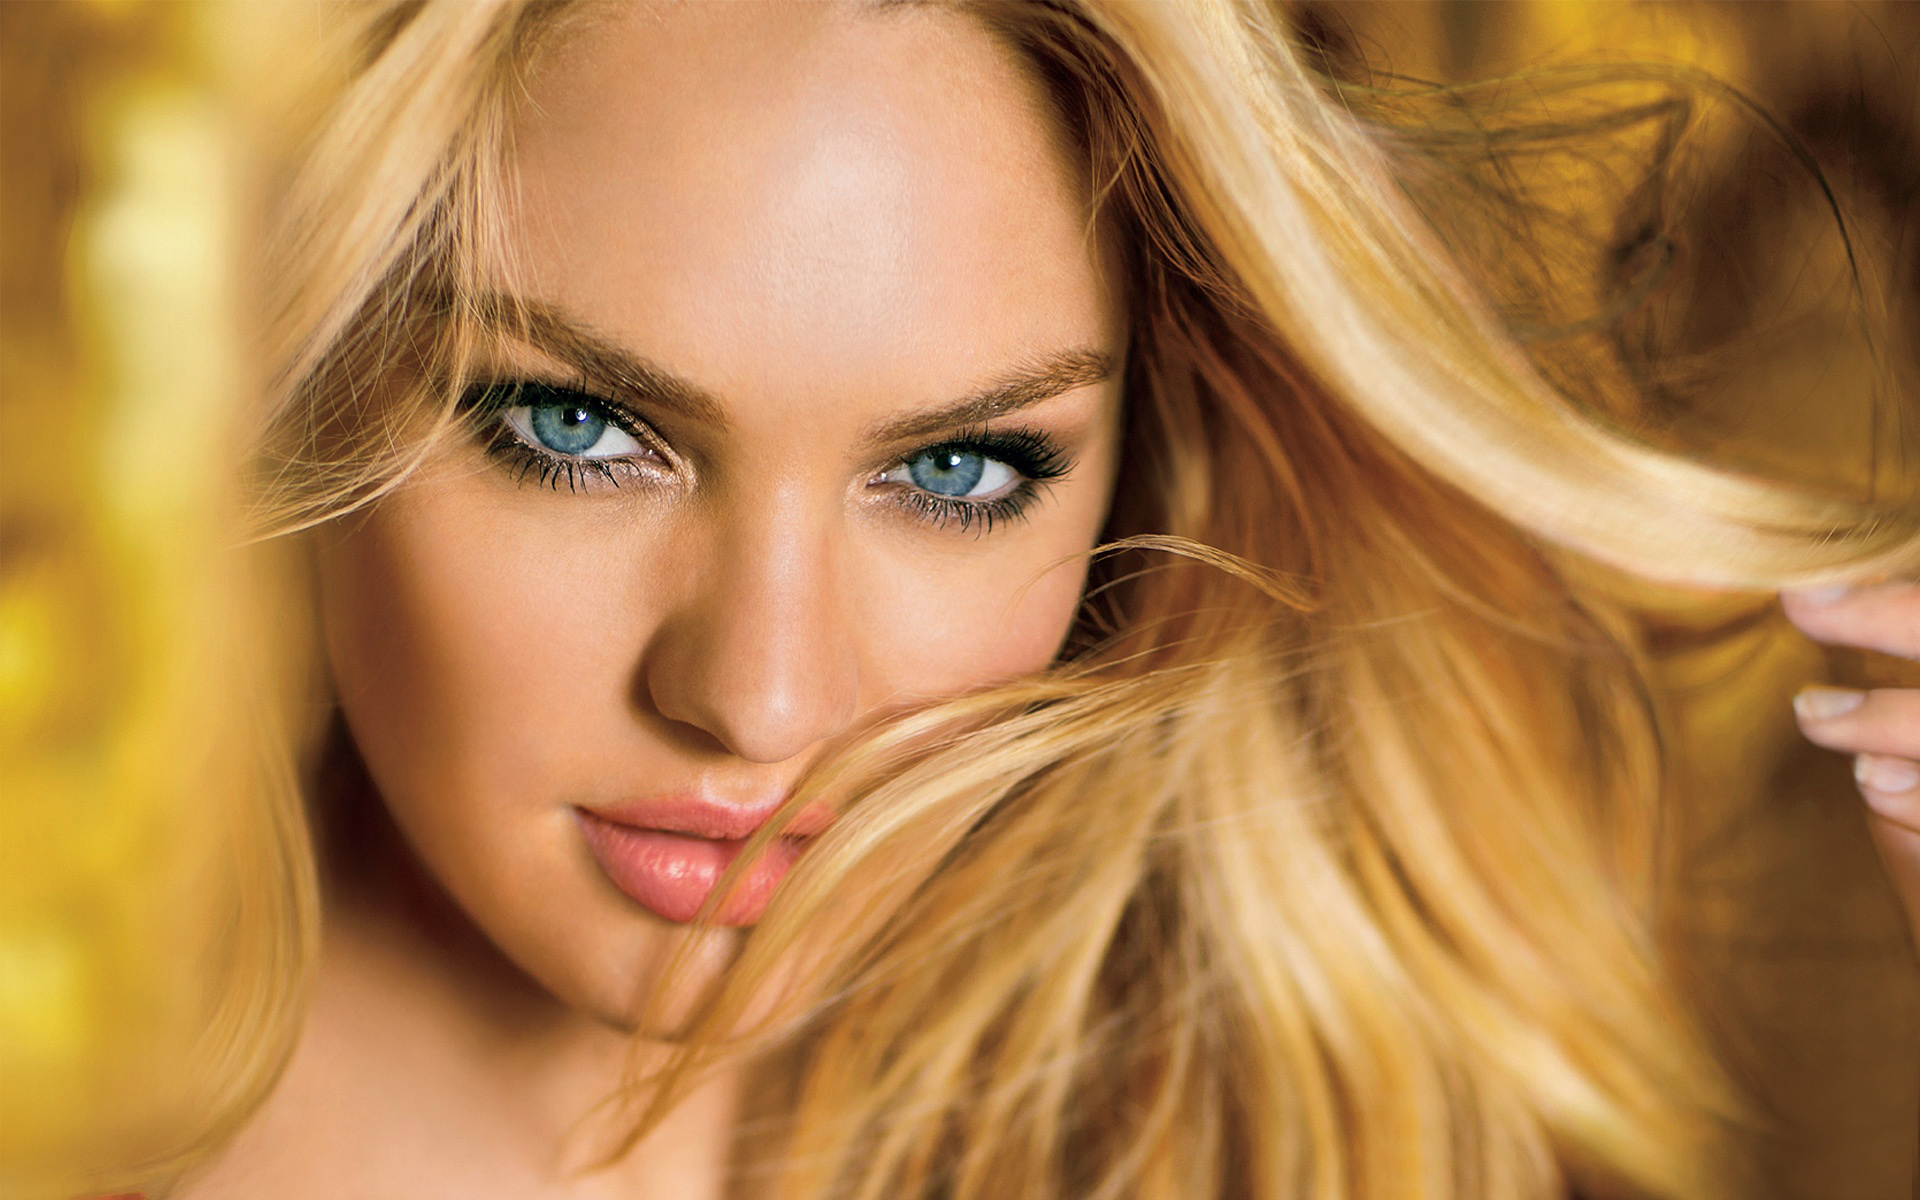 Free Download Candice Swanepoel High Quality Wallpaperswallpaper X For Your Desktop